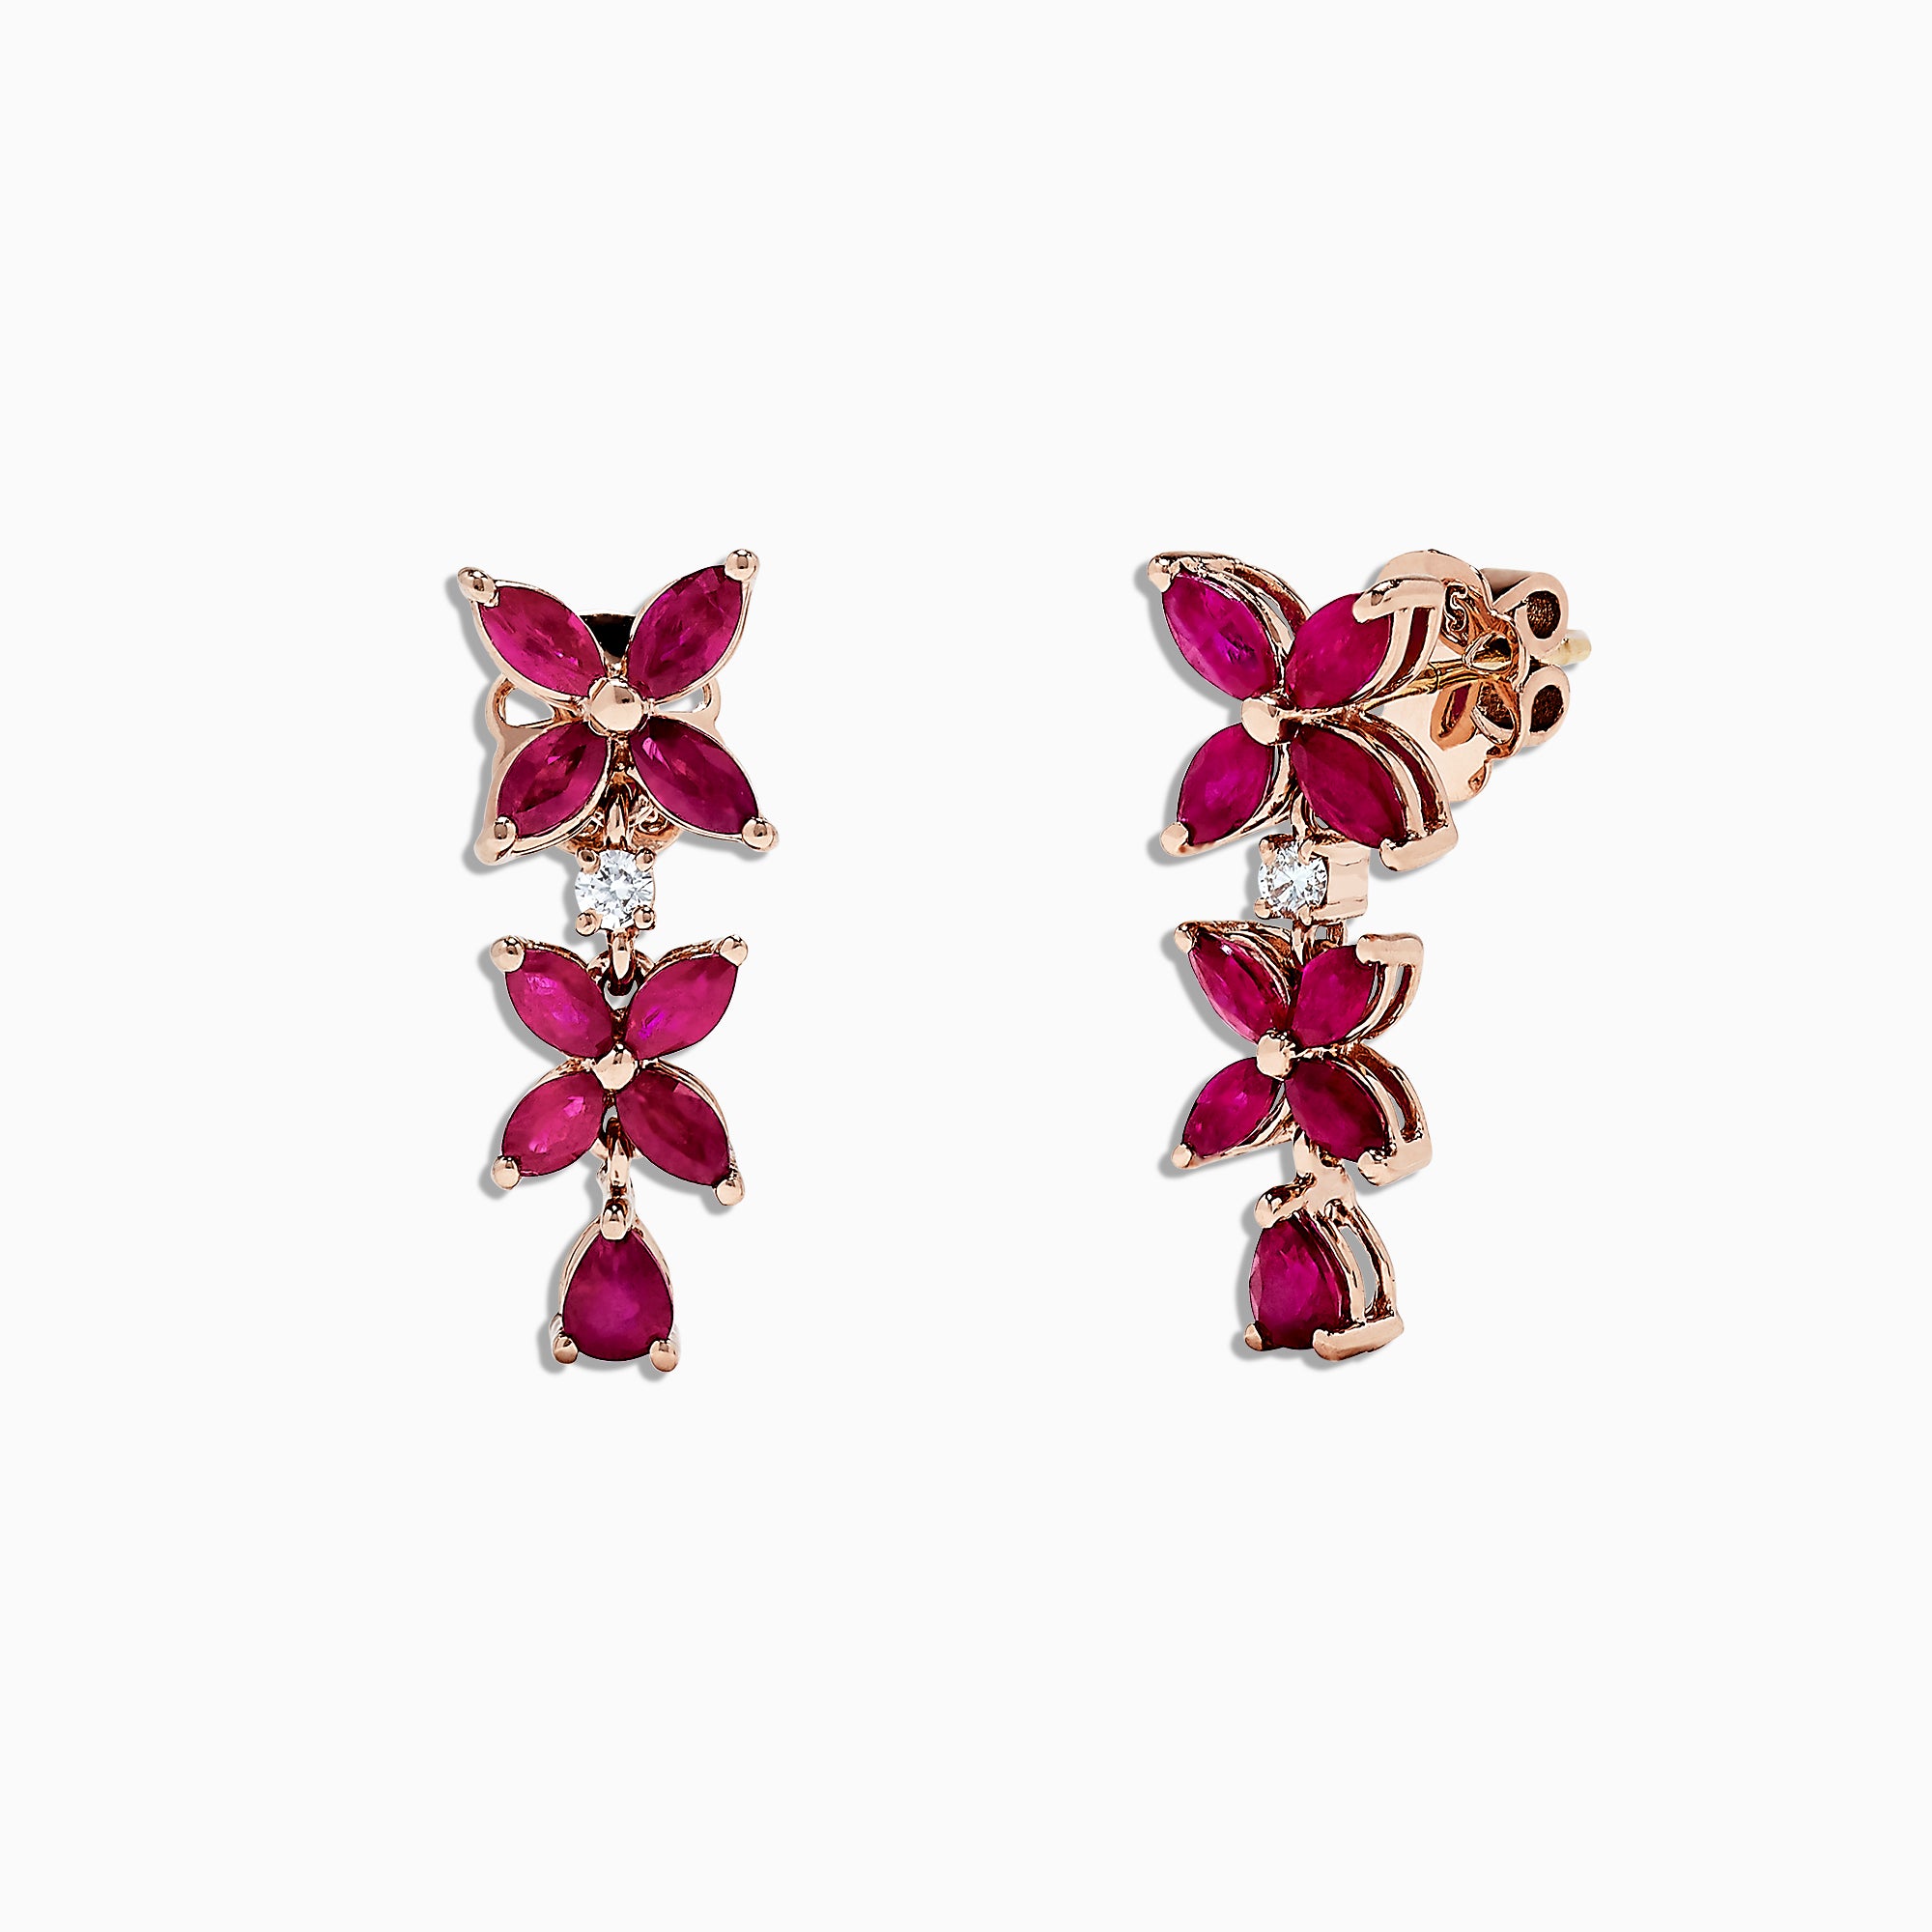 Effy Ruby Royale 14K Rose Gold Ruby and Diamond Earrings, 2.68 TCW